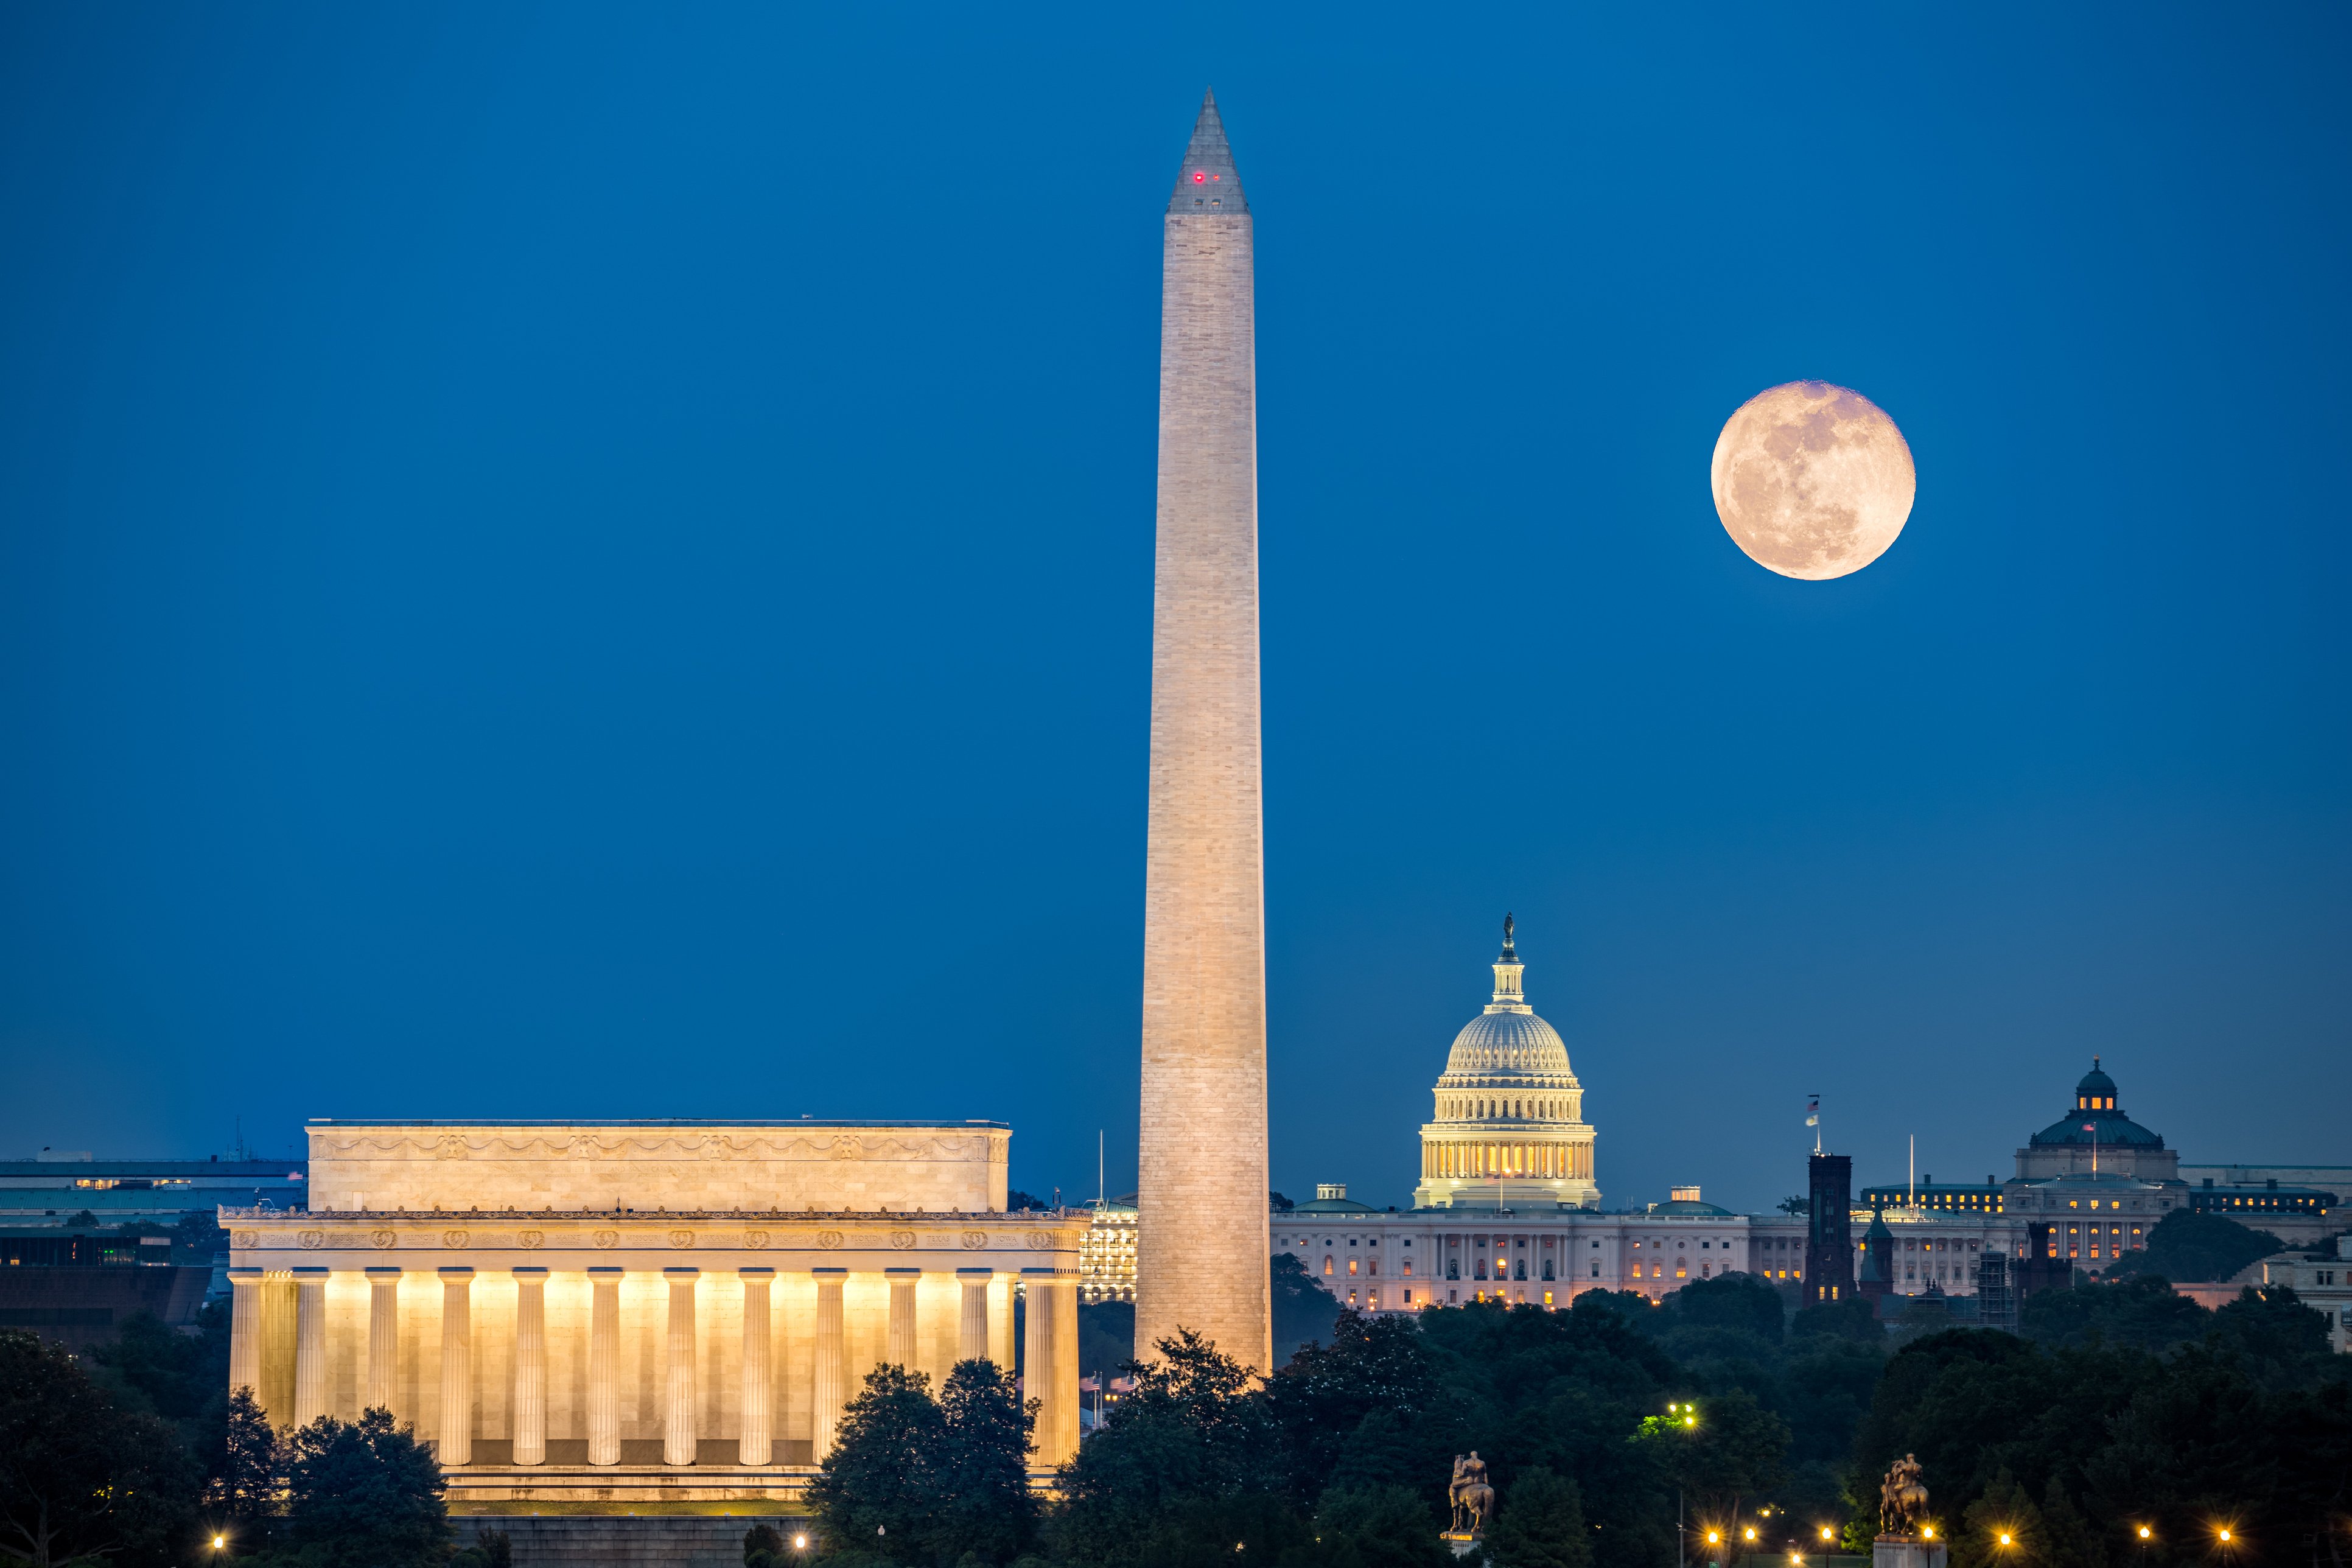 One of the locations you'll visit on this ghost tour in Washington D.C.